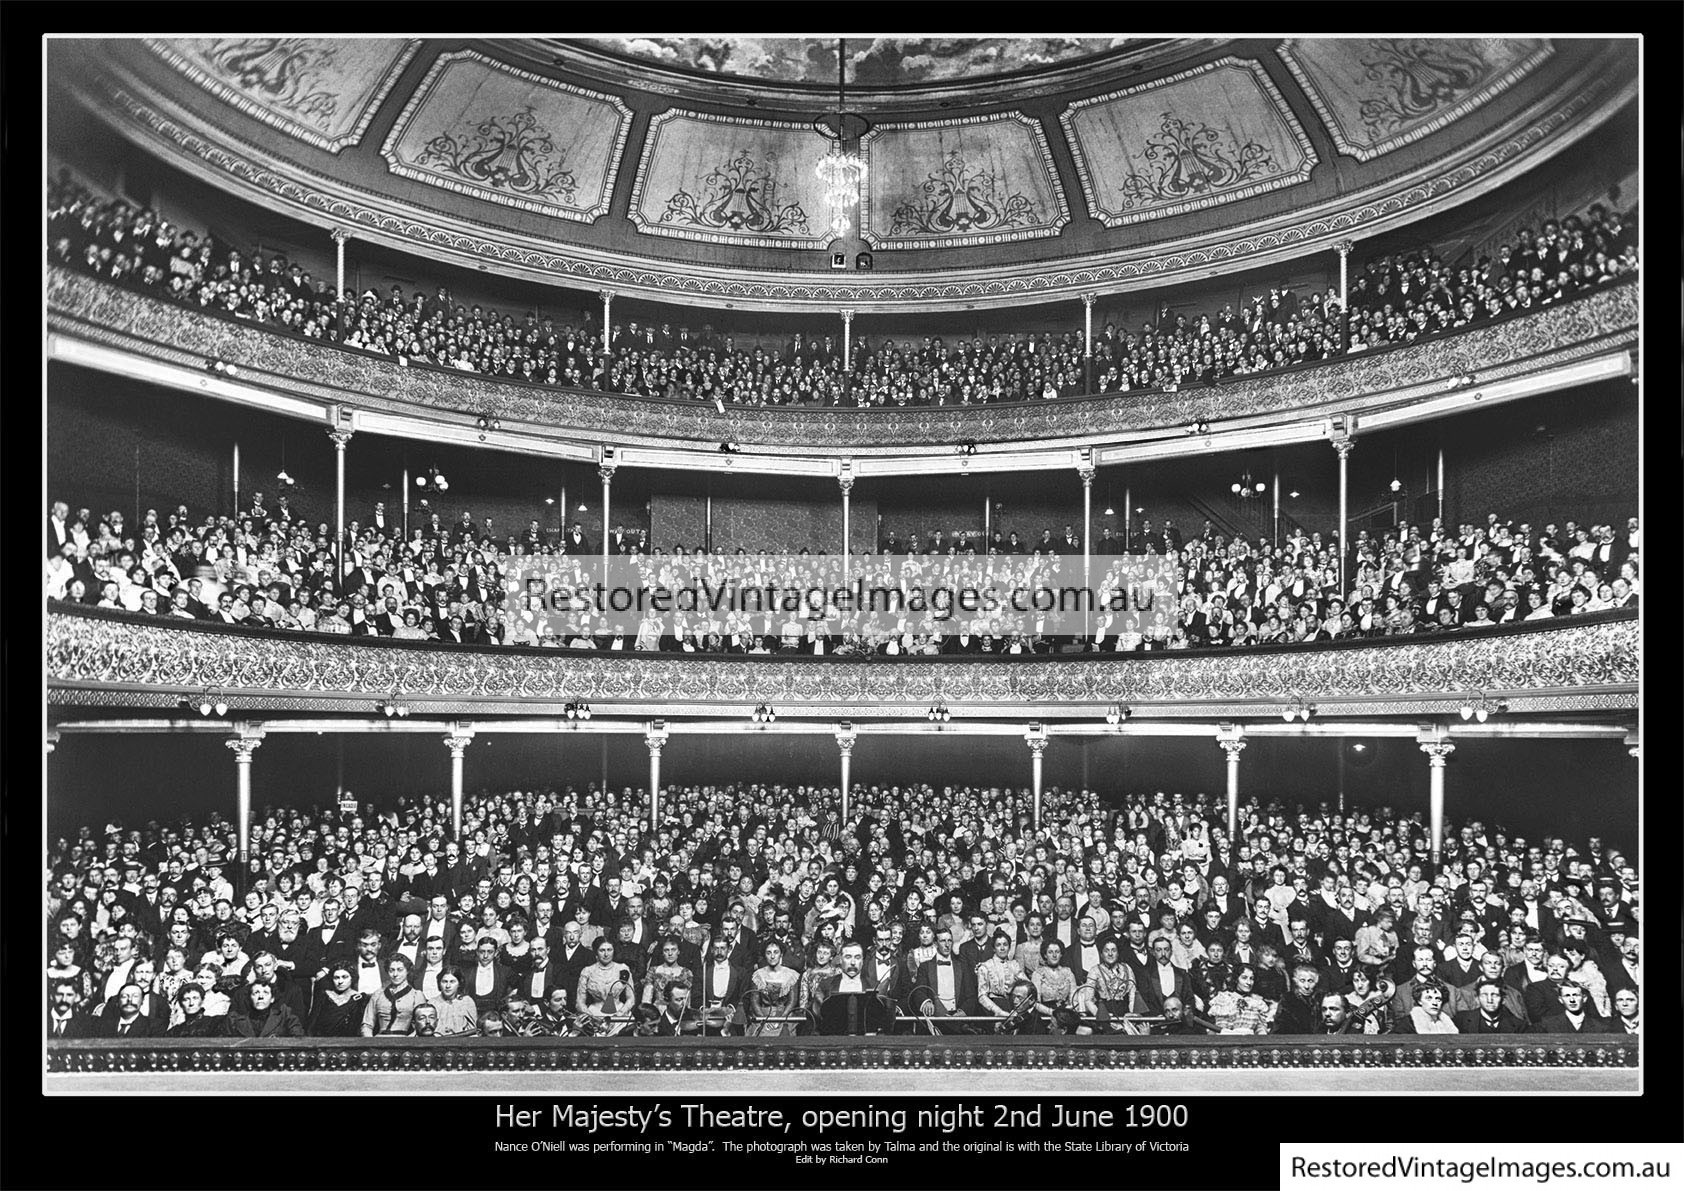 Her Majesty’s Theatre 2nd June 1900